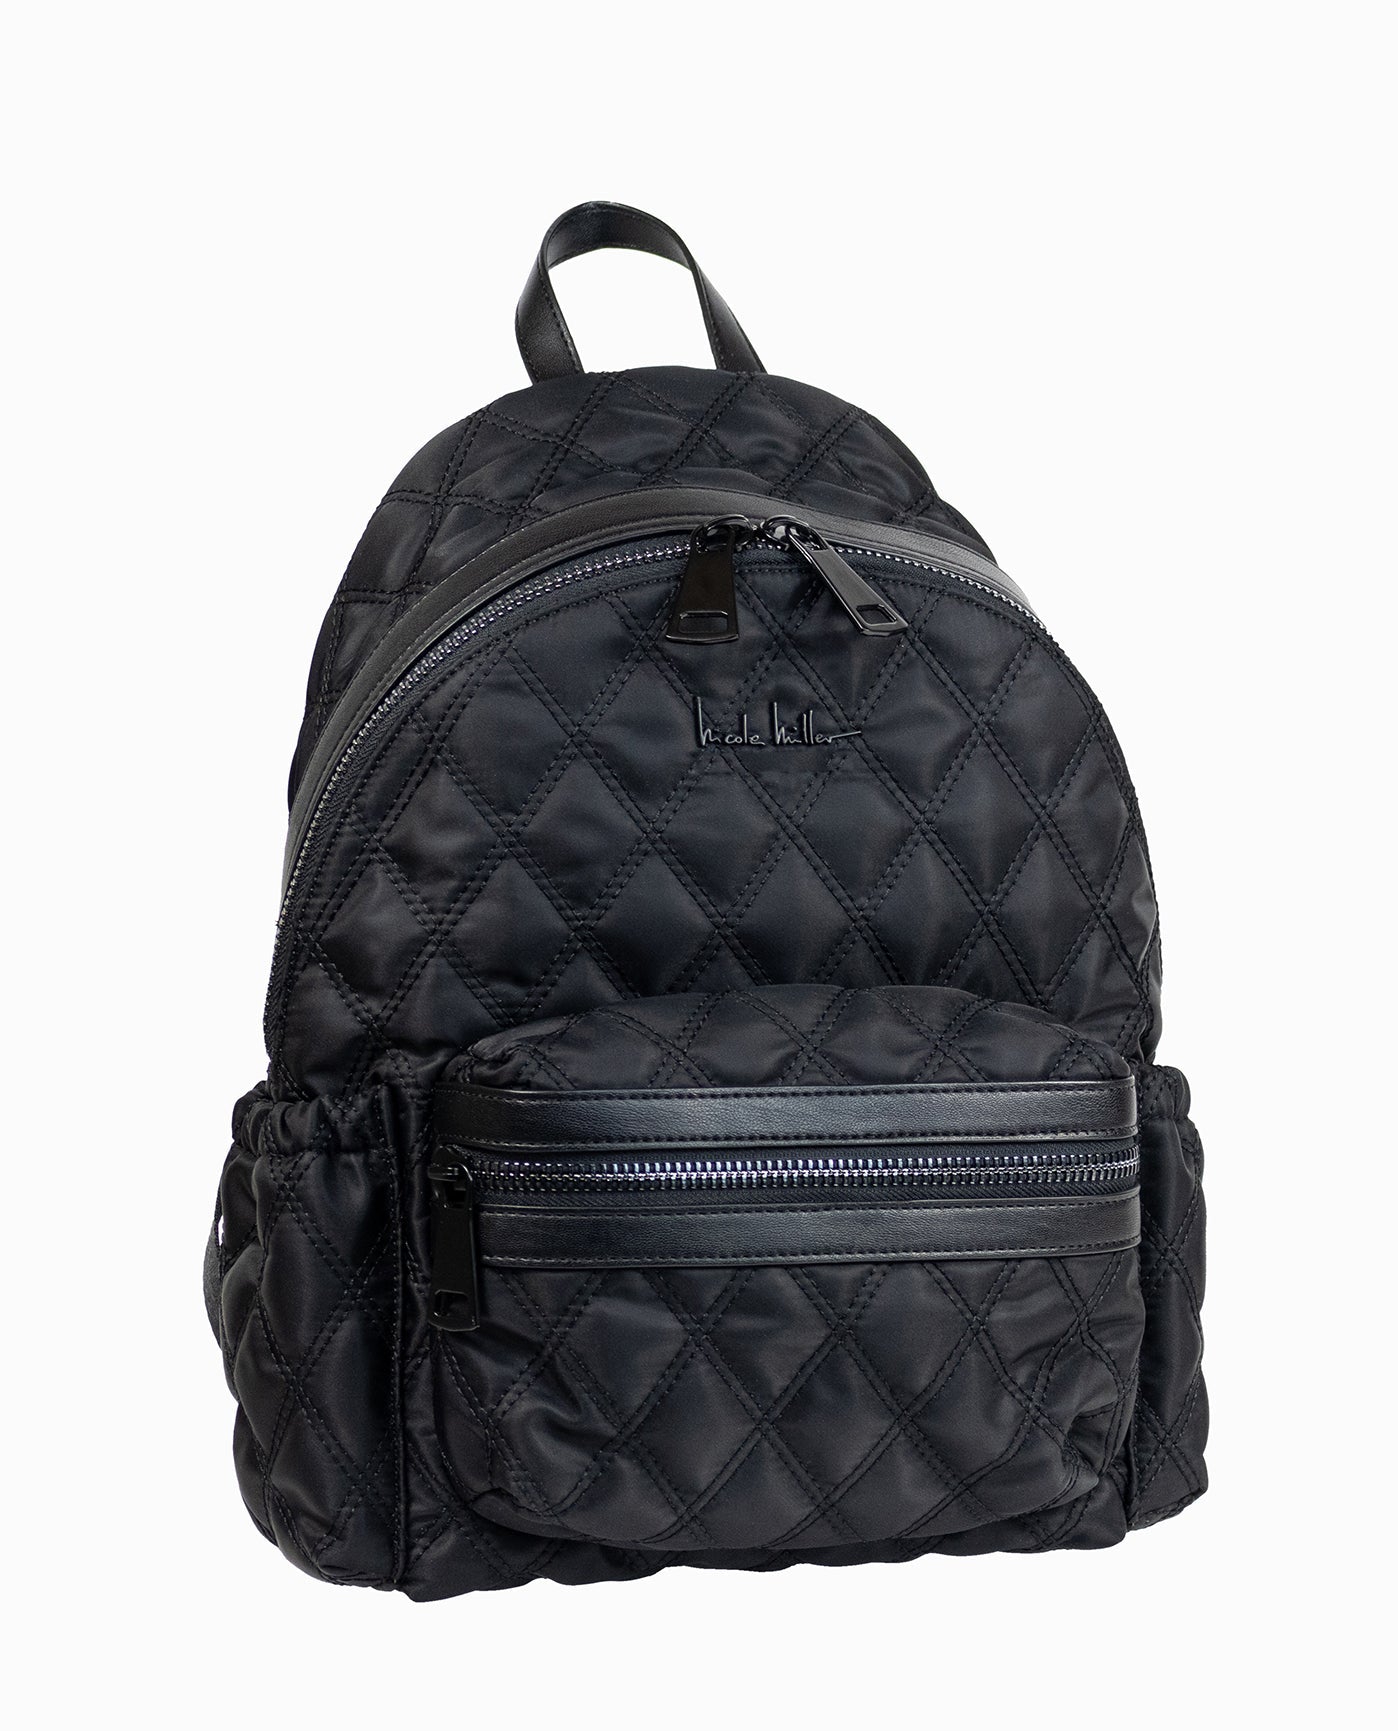 Nicole Miller Quilted Nylon Backpack Os / Black Accessories Handbags